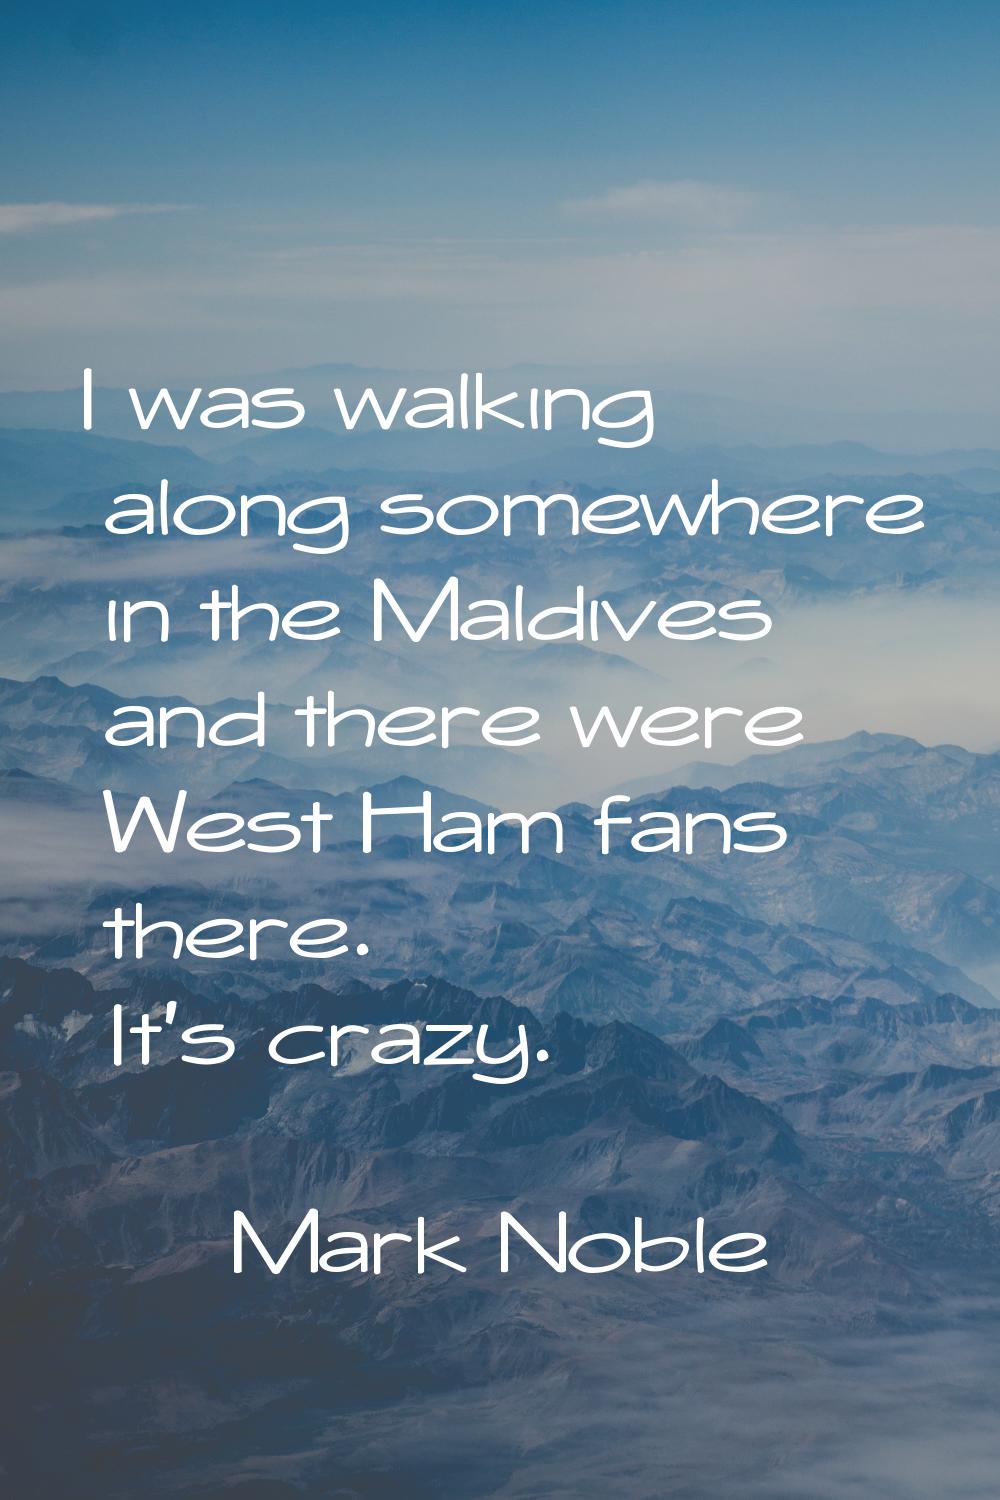 I was walking along somewhere in the Maldives and there were West Ham fans there. It's crazy.